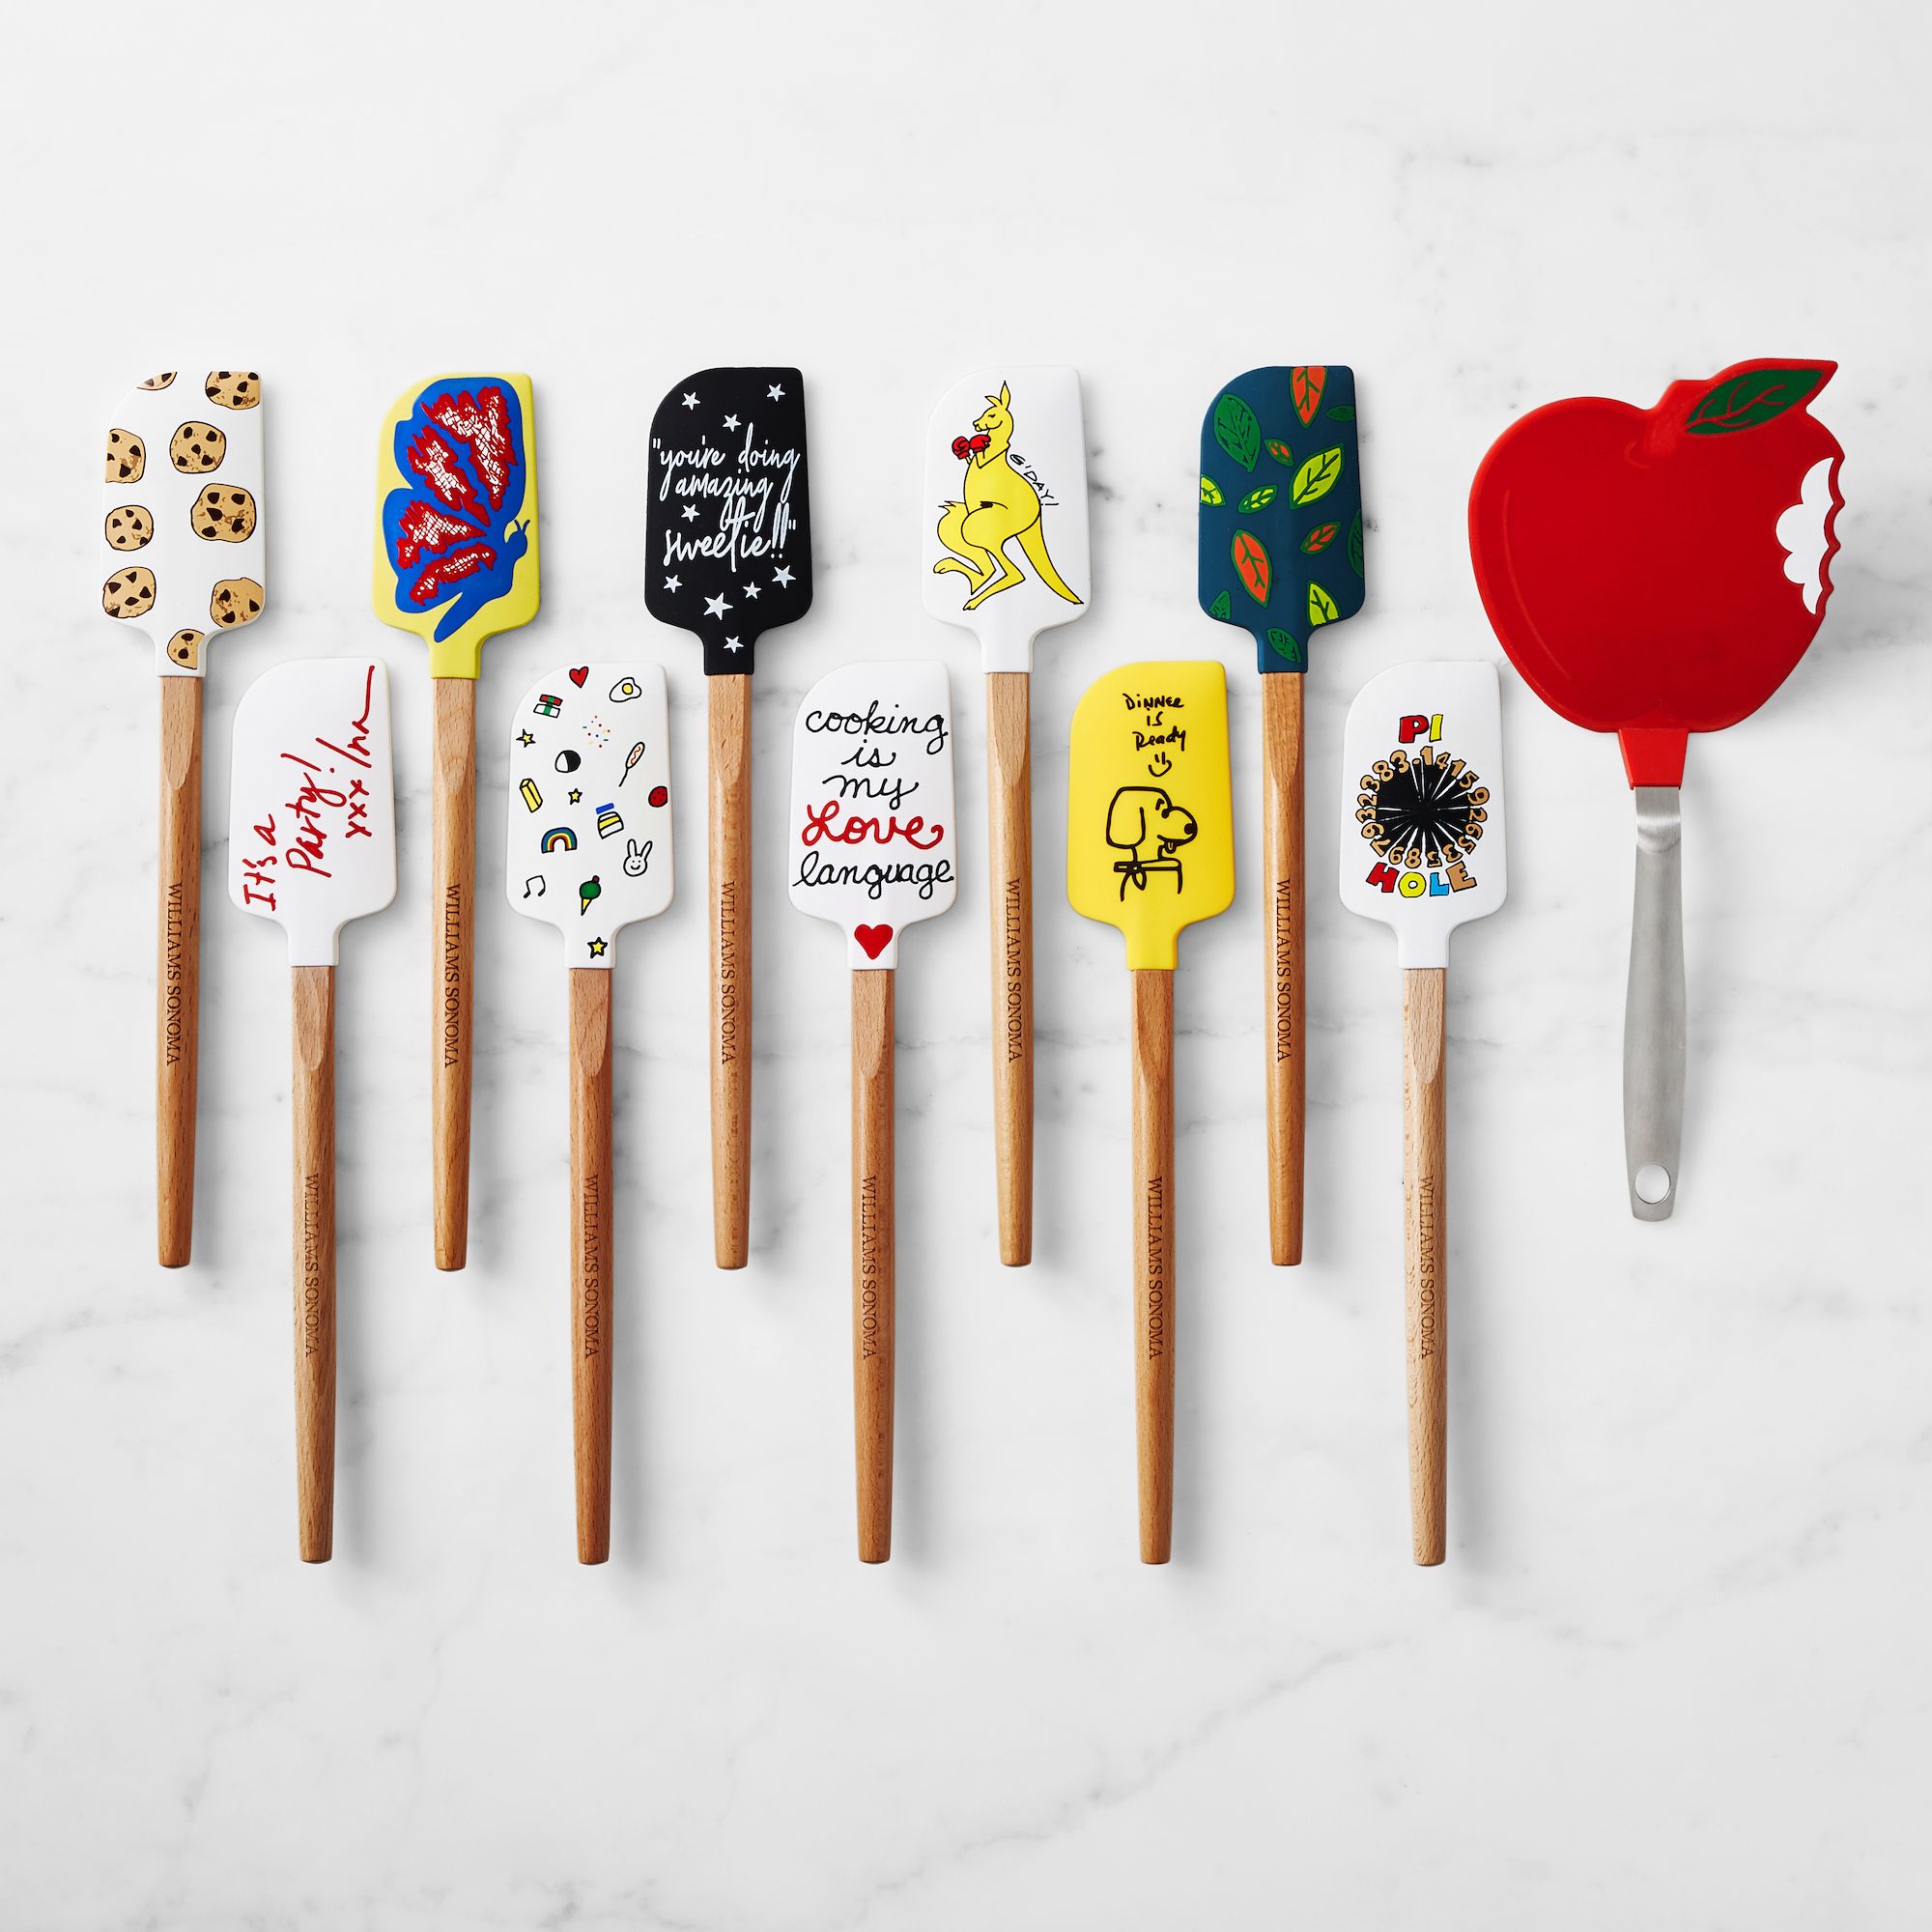 Williams Sonoma's No Kid Hungry Line 2020 Includes Designs By Dolly Parton  And Ina Garten